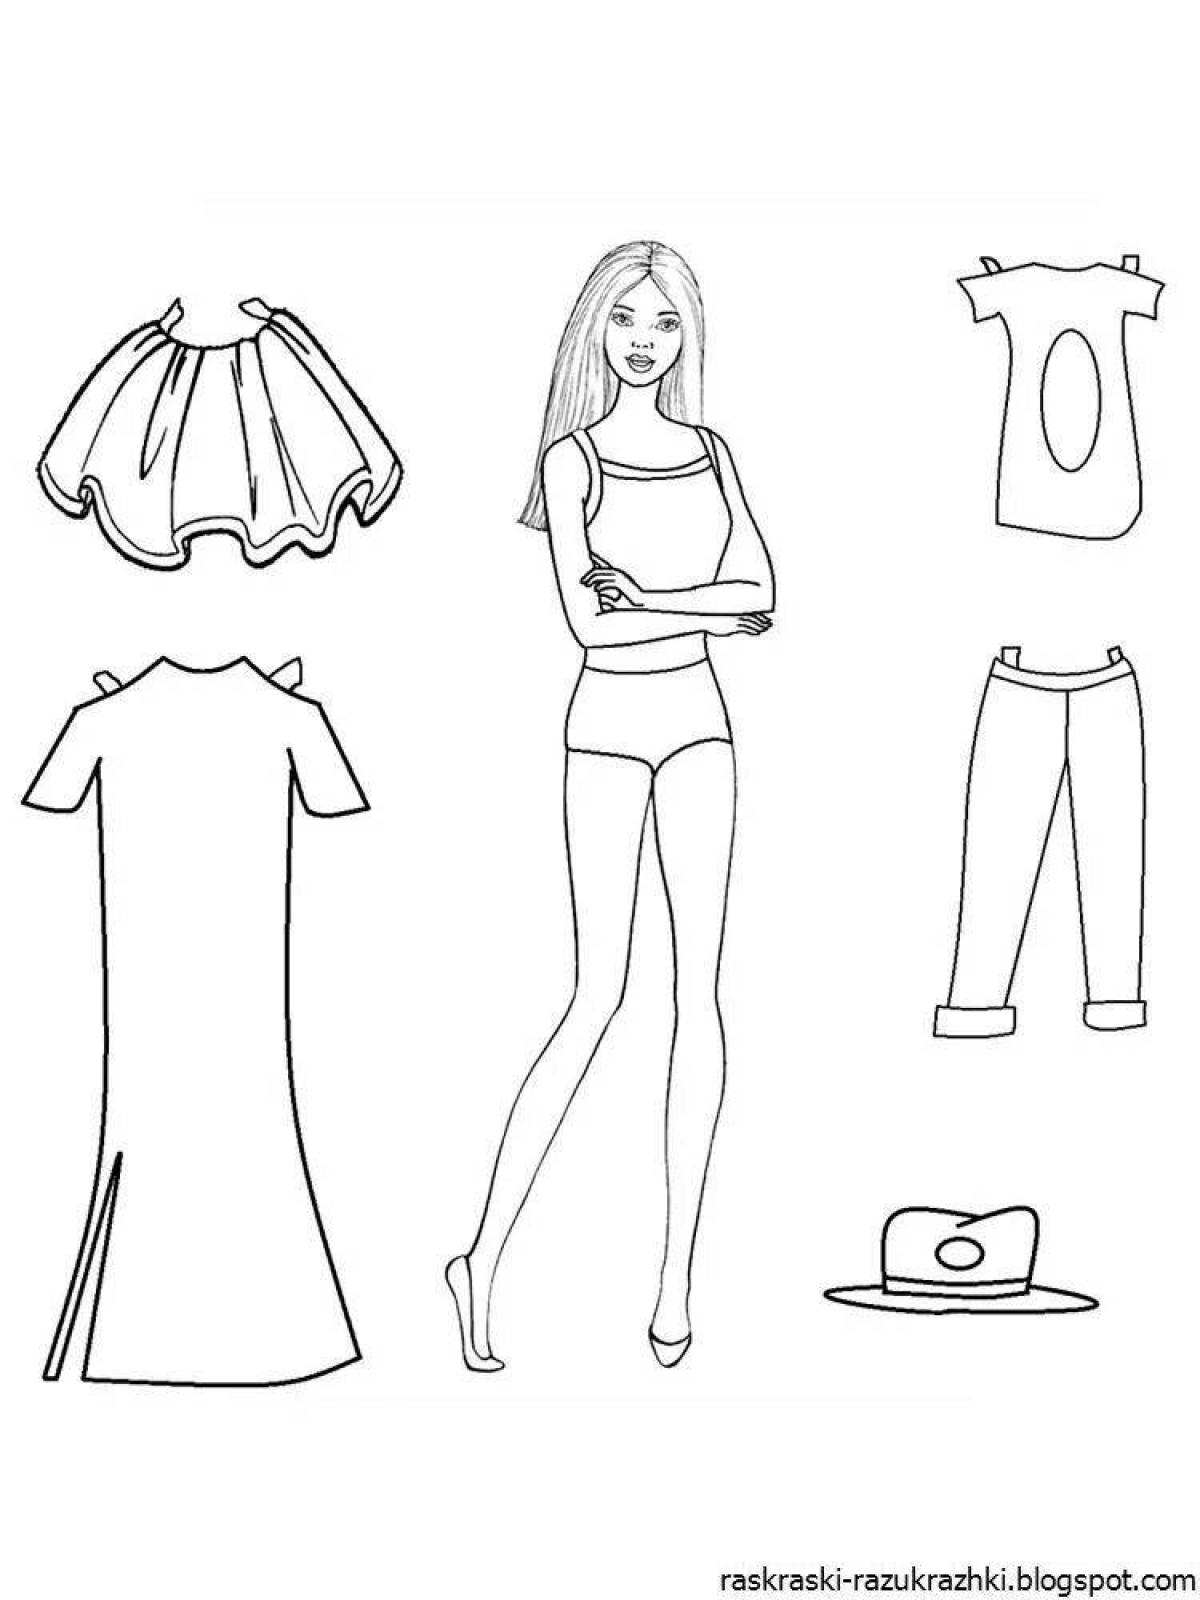 Amazing coloring pages for girls in clothes